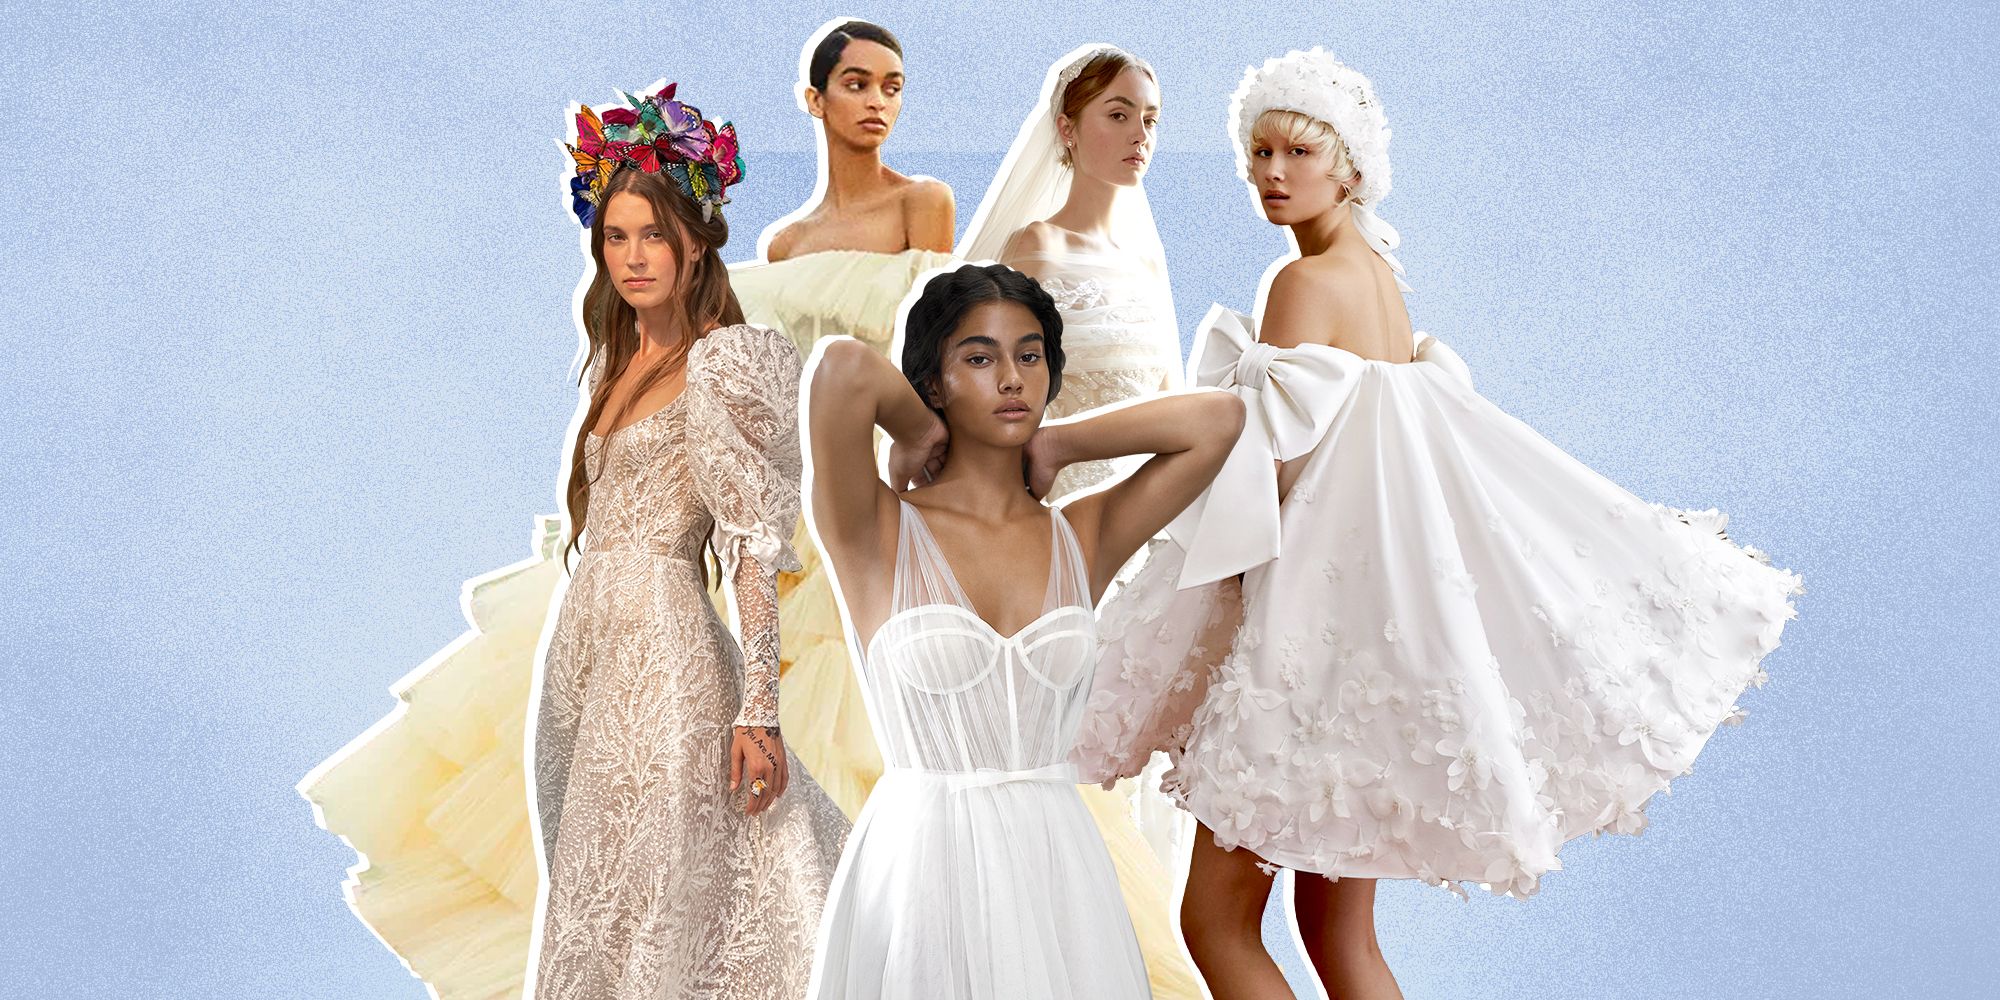 dresses to wear to a october wedding